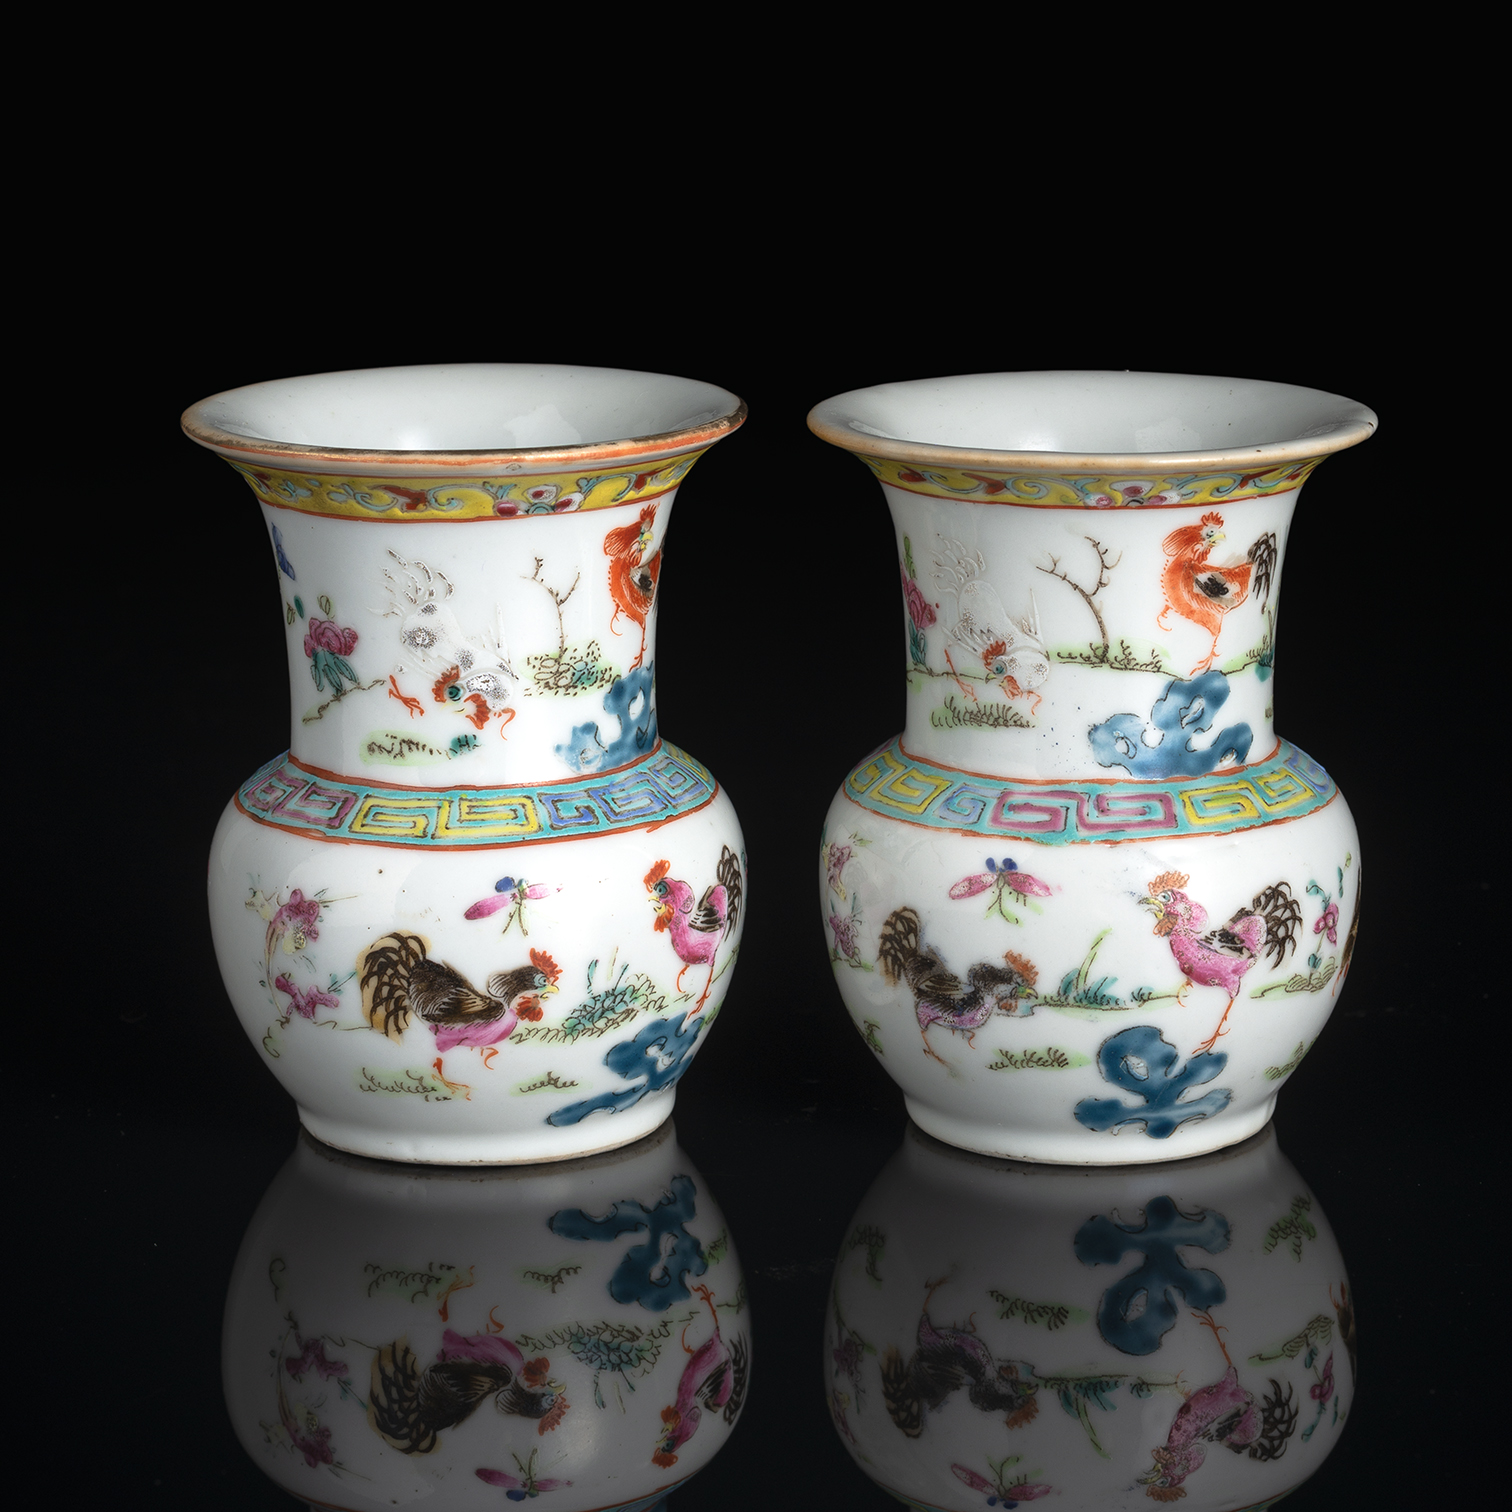 TWO SMALL SPITTOON-SHAPED 'FAMILLE ROSE' ROOSTER PORCELAIN VASES